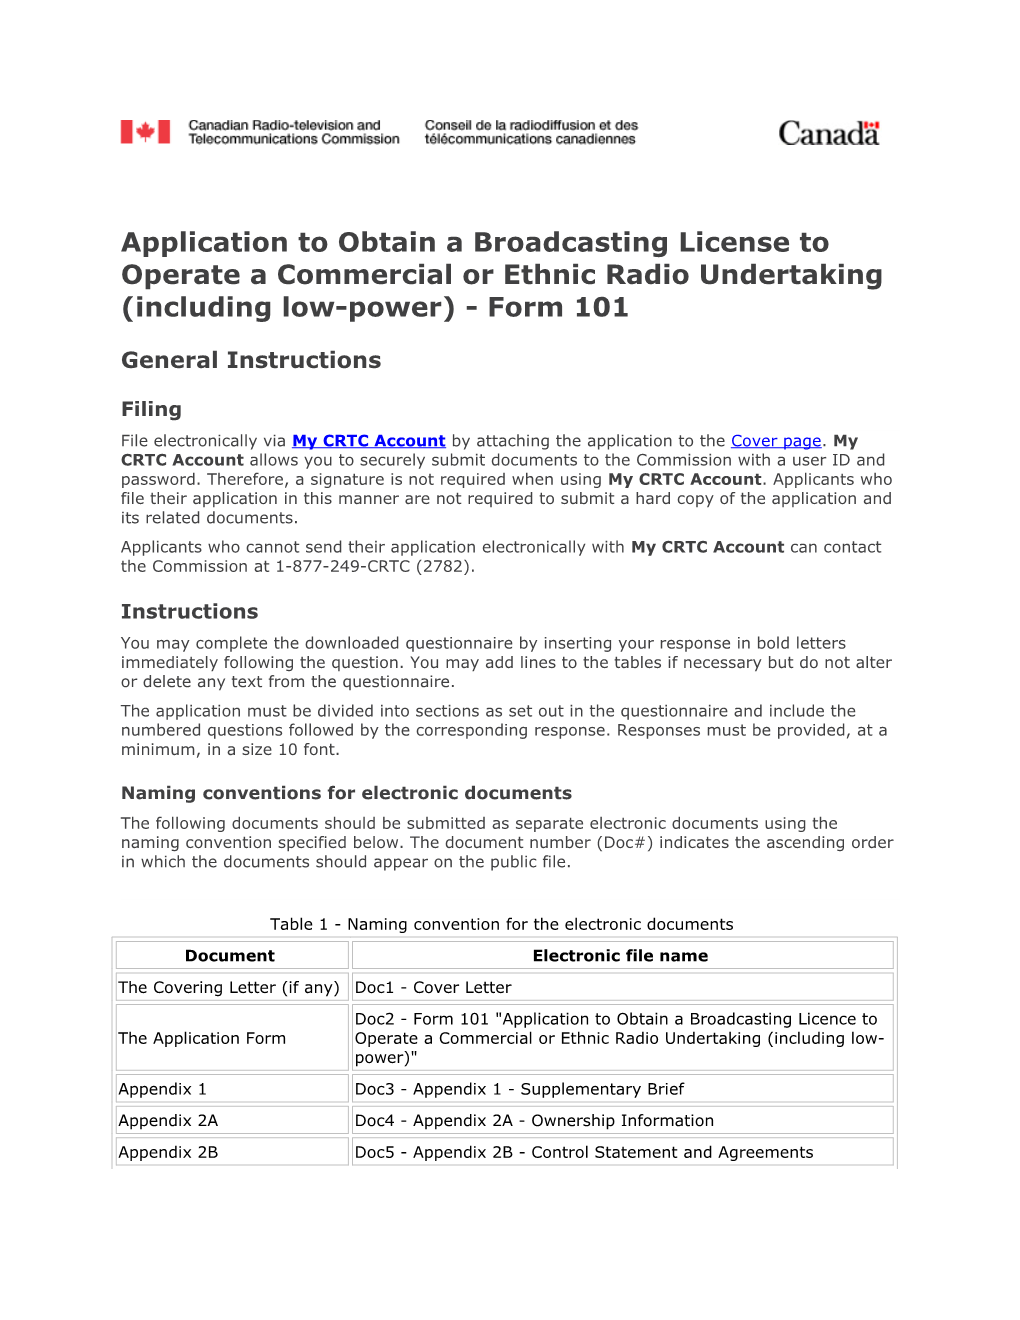 Application to Obtain a Broadcasting License to Operate a Commercial Or Ethnic Radio